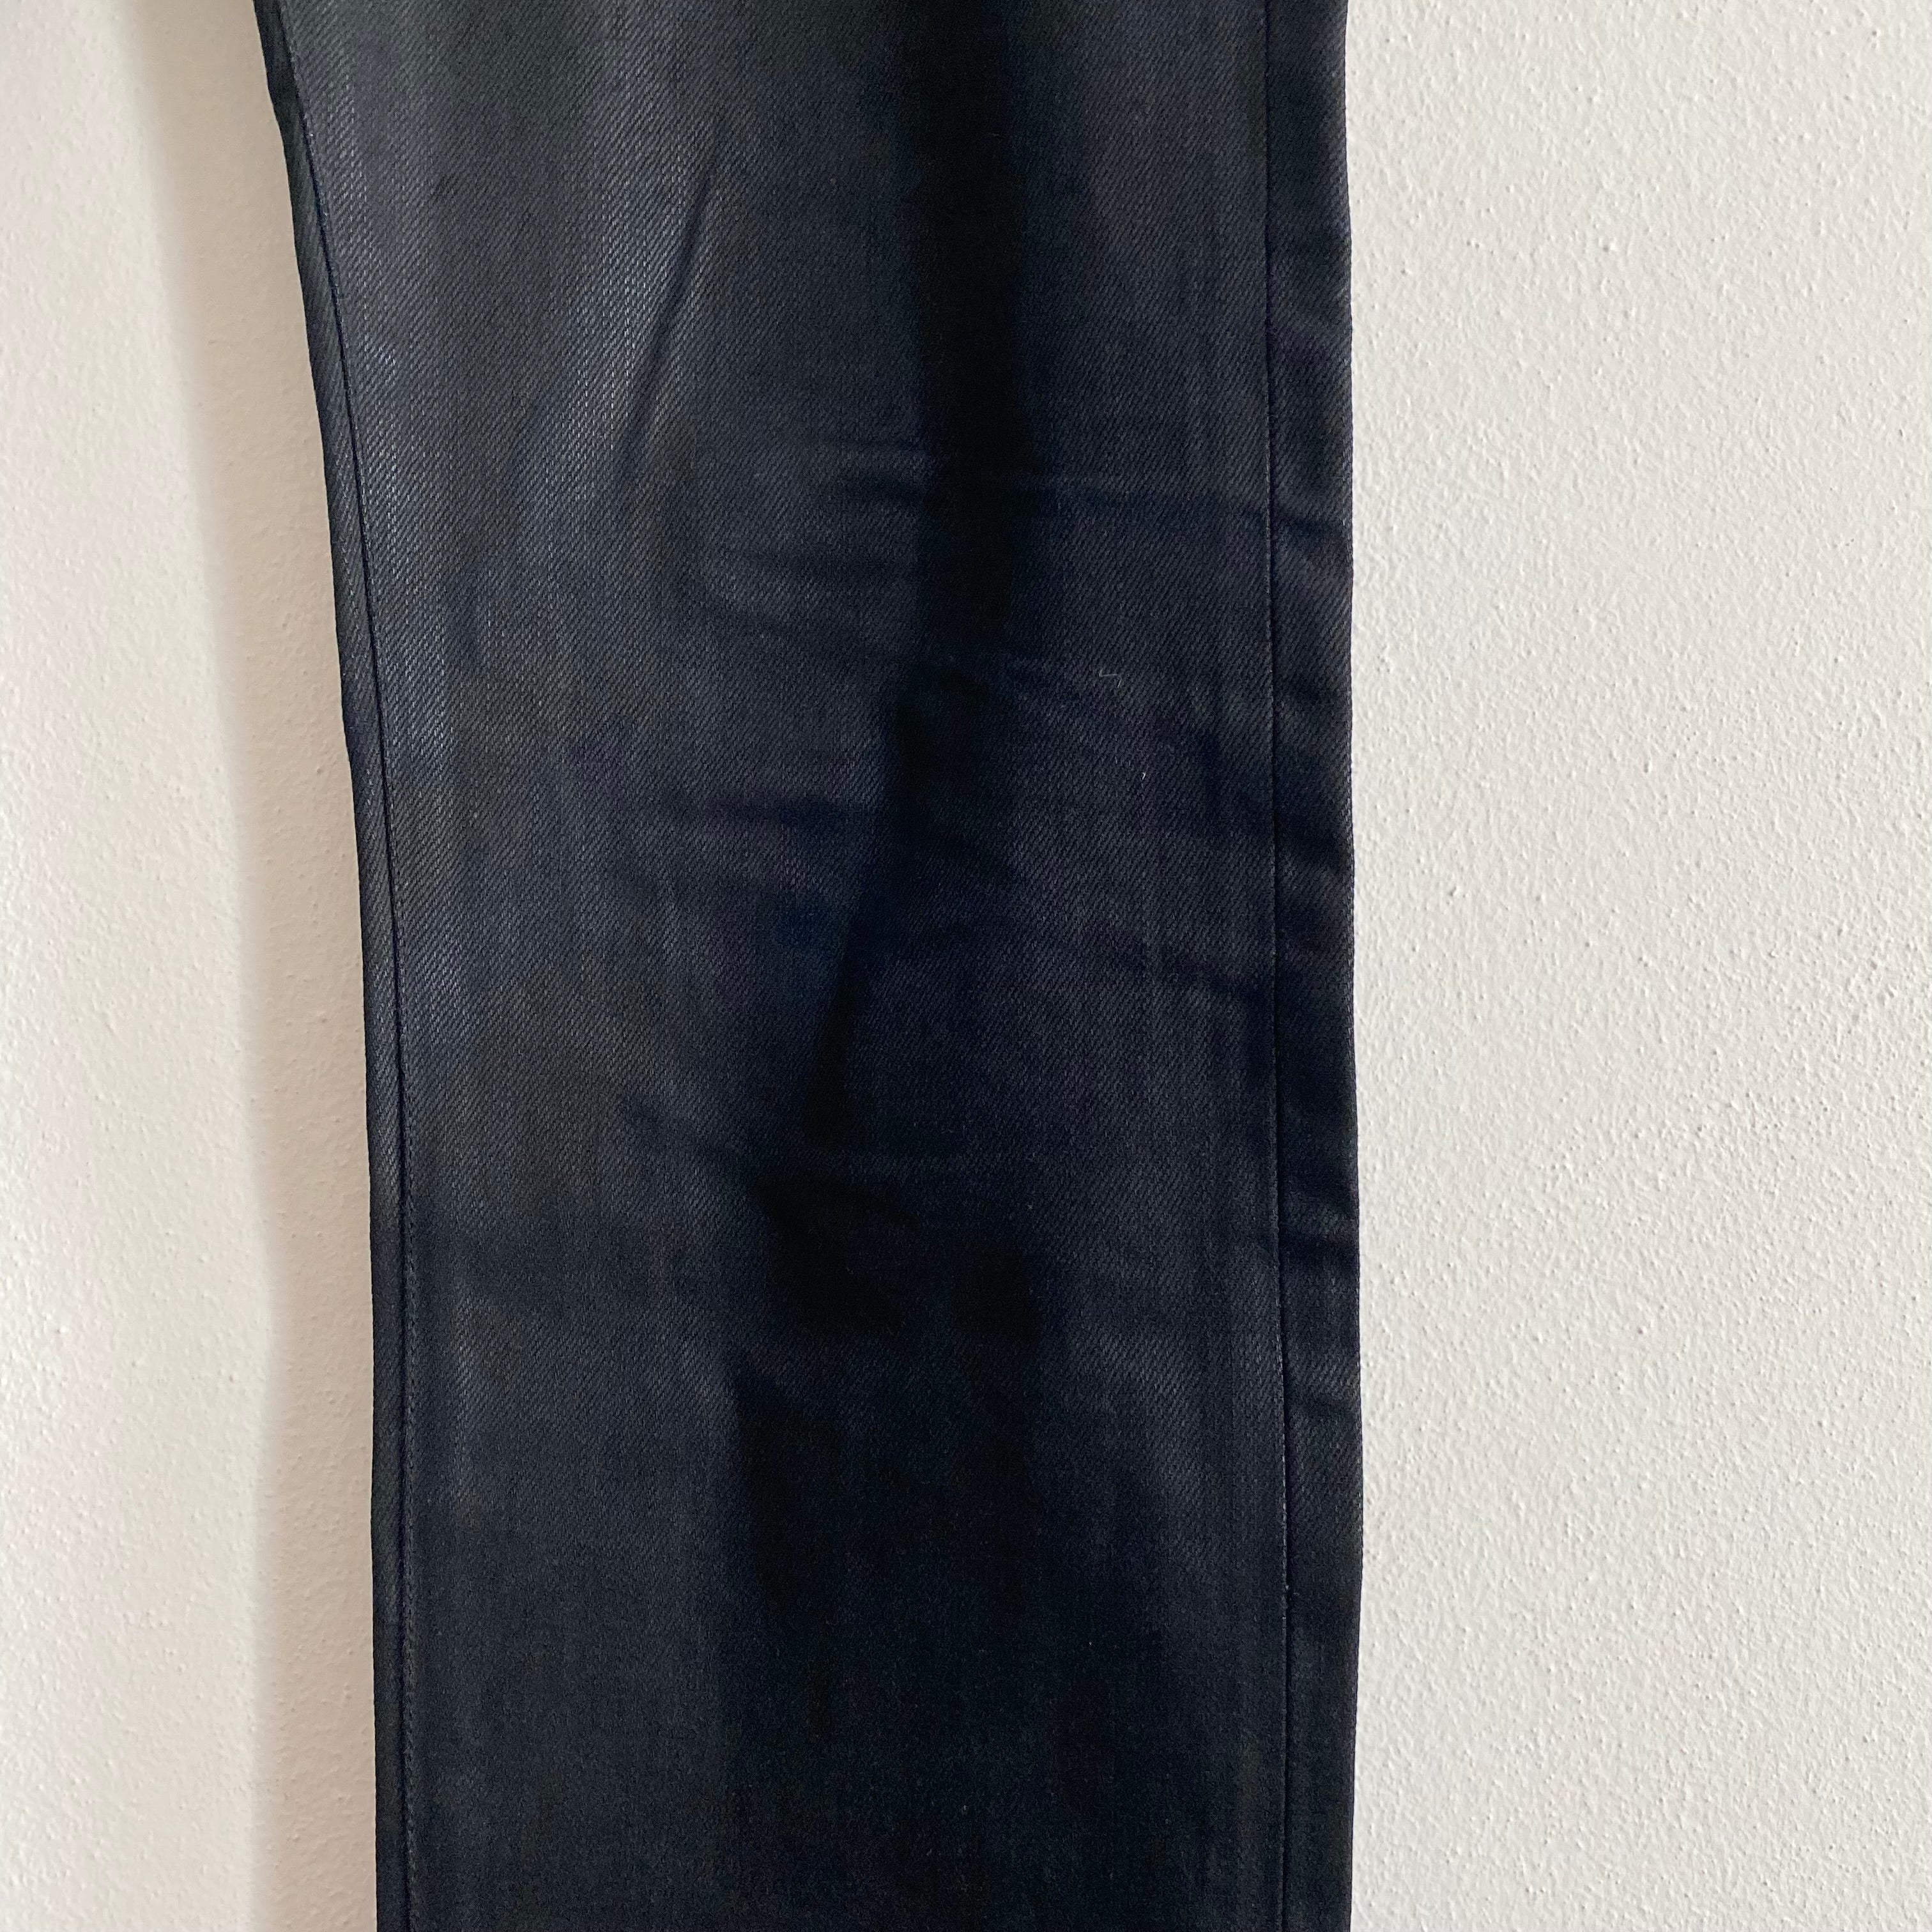 The Slim Jean in Black Over-Dye Selvage - 35